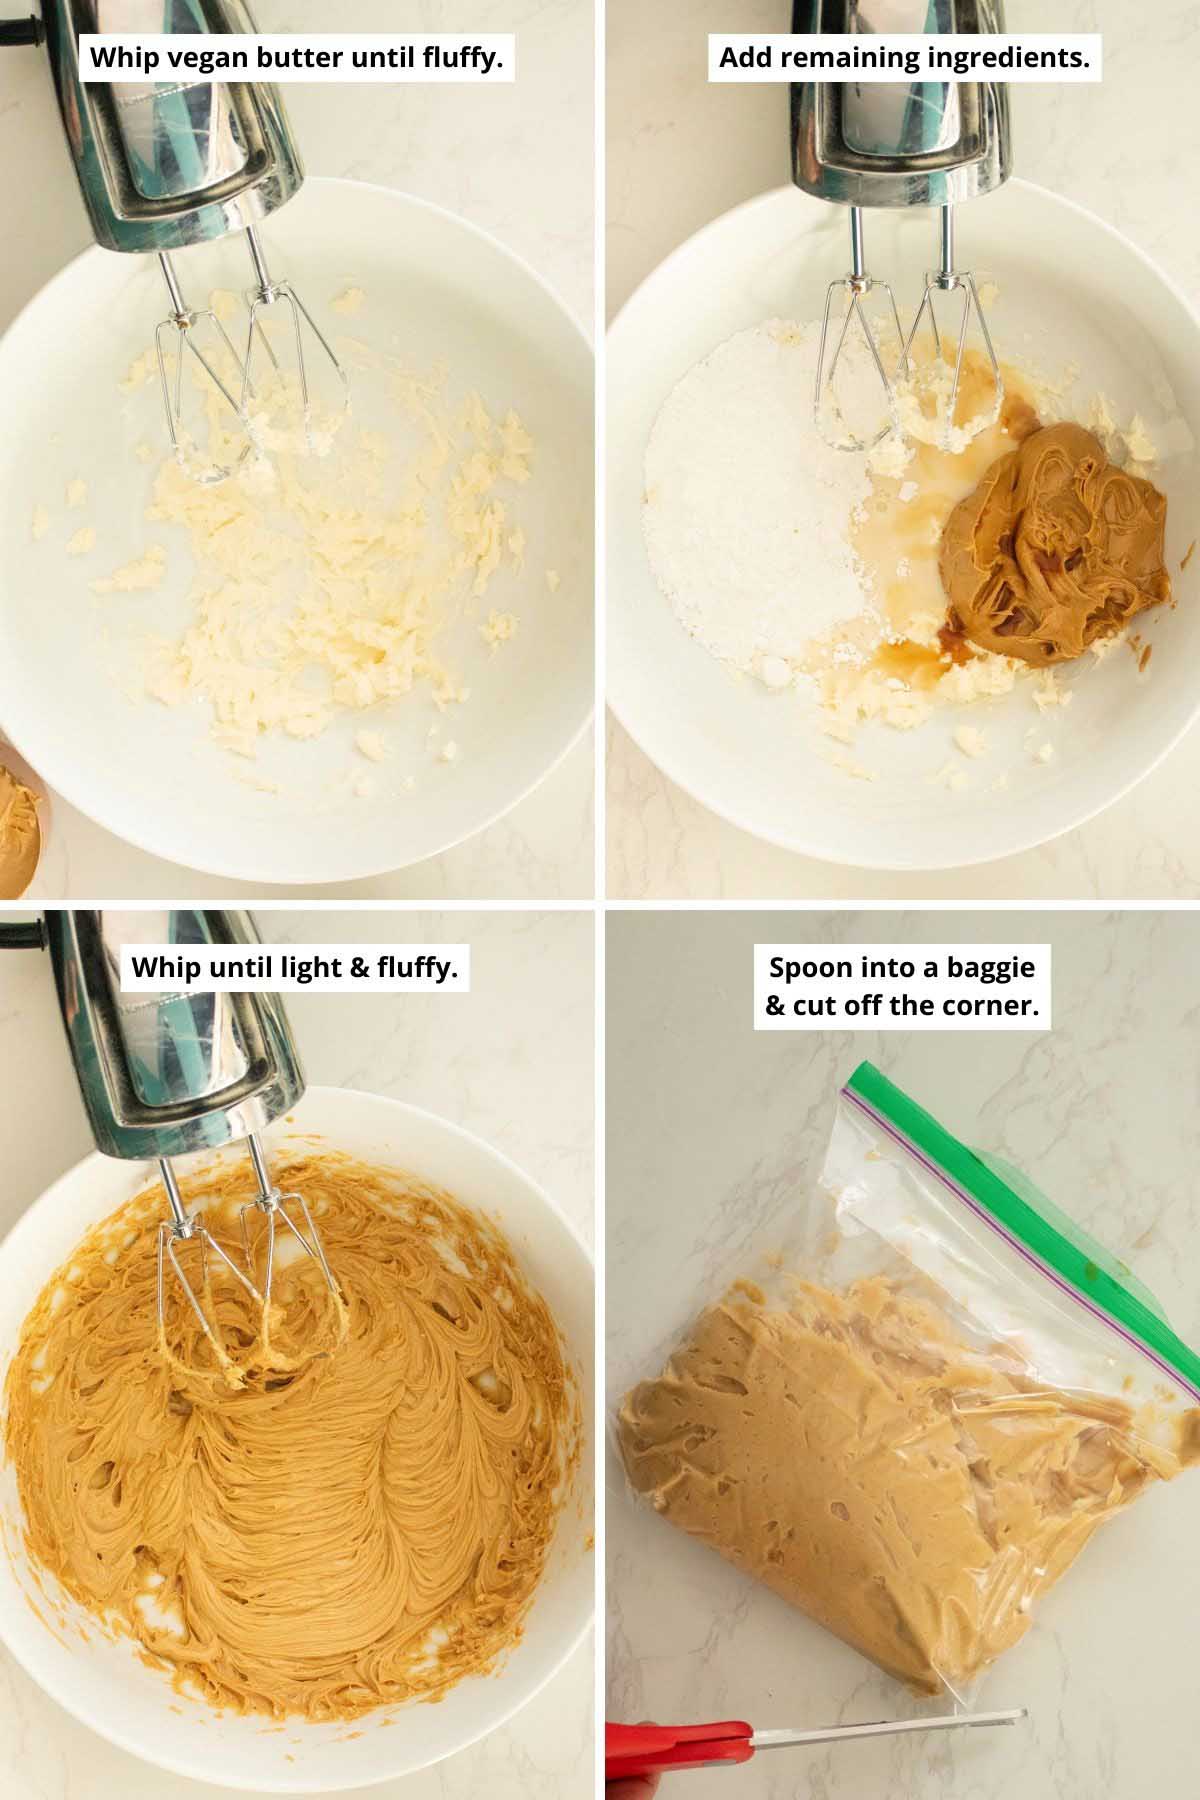 image collage showing whipped vegan butter, adding the other frosting ingredients, and the whipped frosting in a bowl and in a baggie, ready to pipe